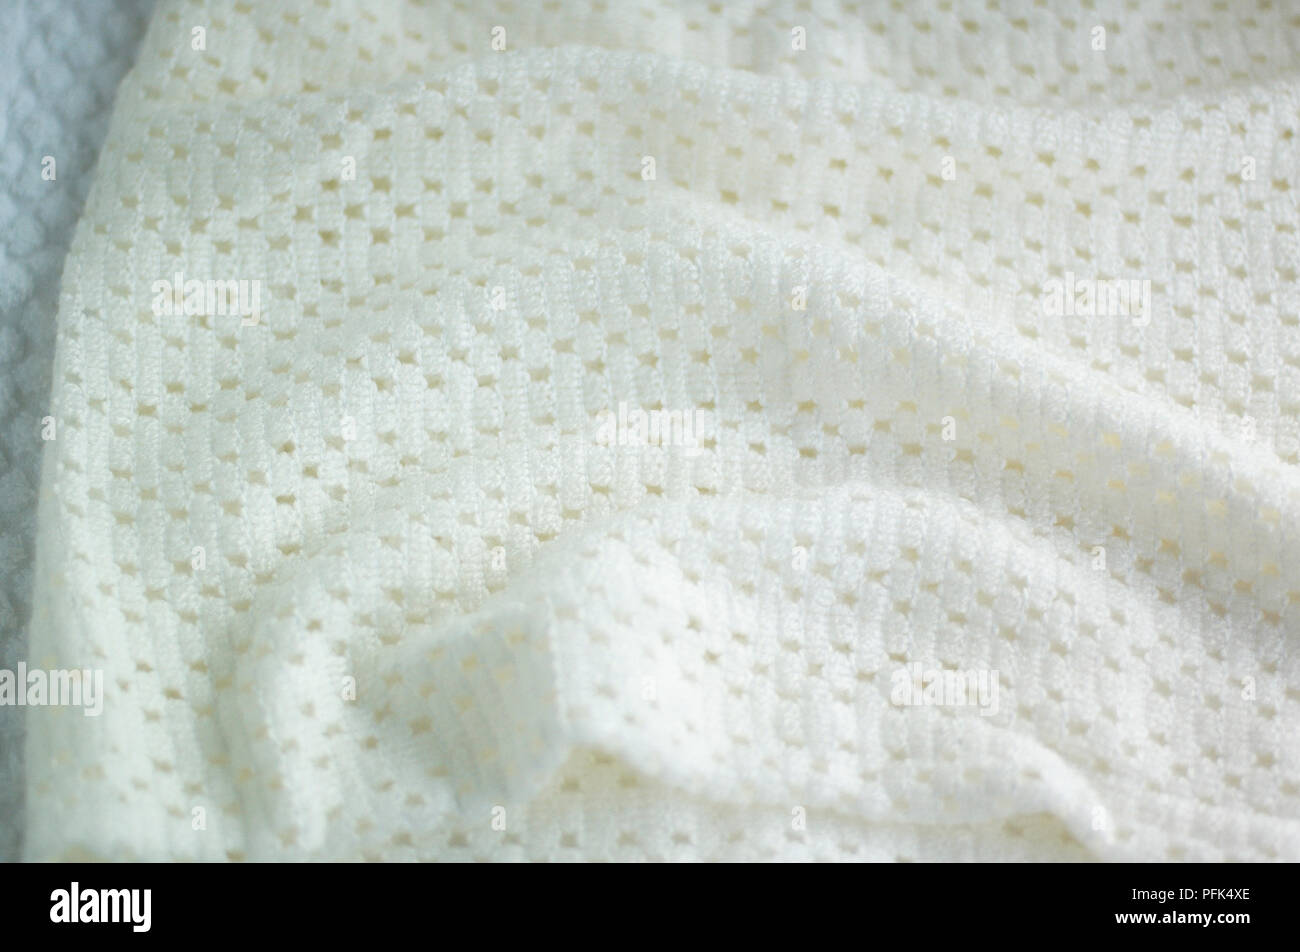 White crocheted baby blanket, close-up Stock Photo